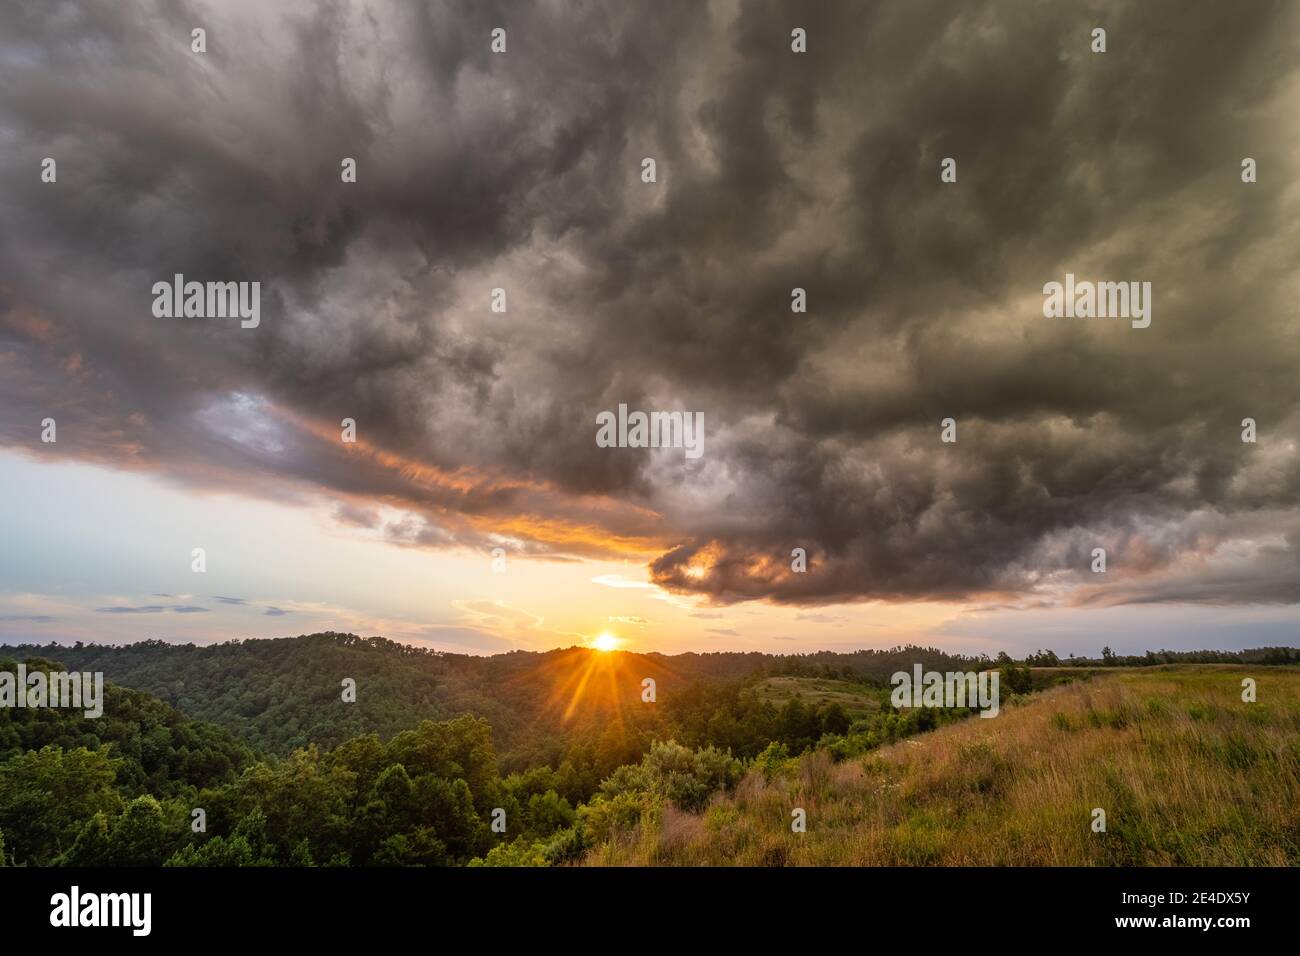 The final evening light as the sun sets over hills in Central Appalachia. Stock Photo